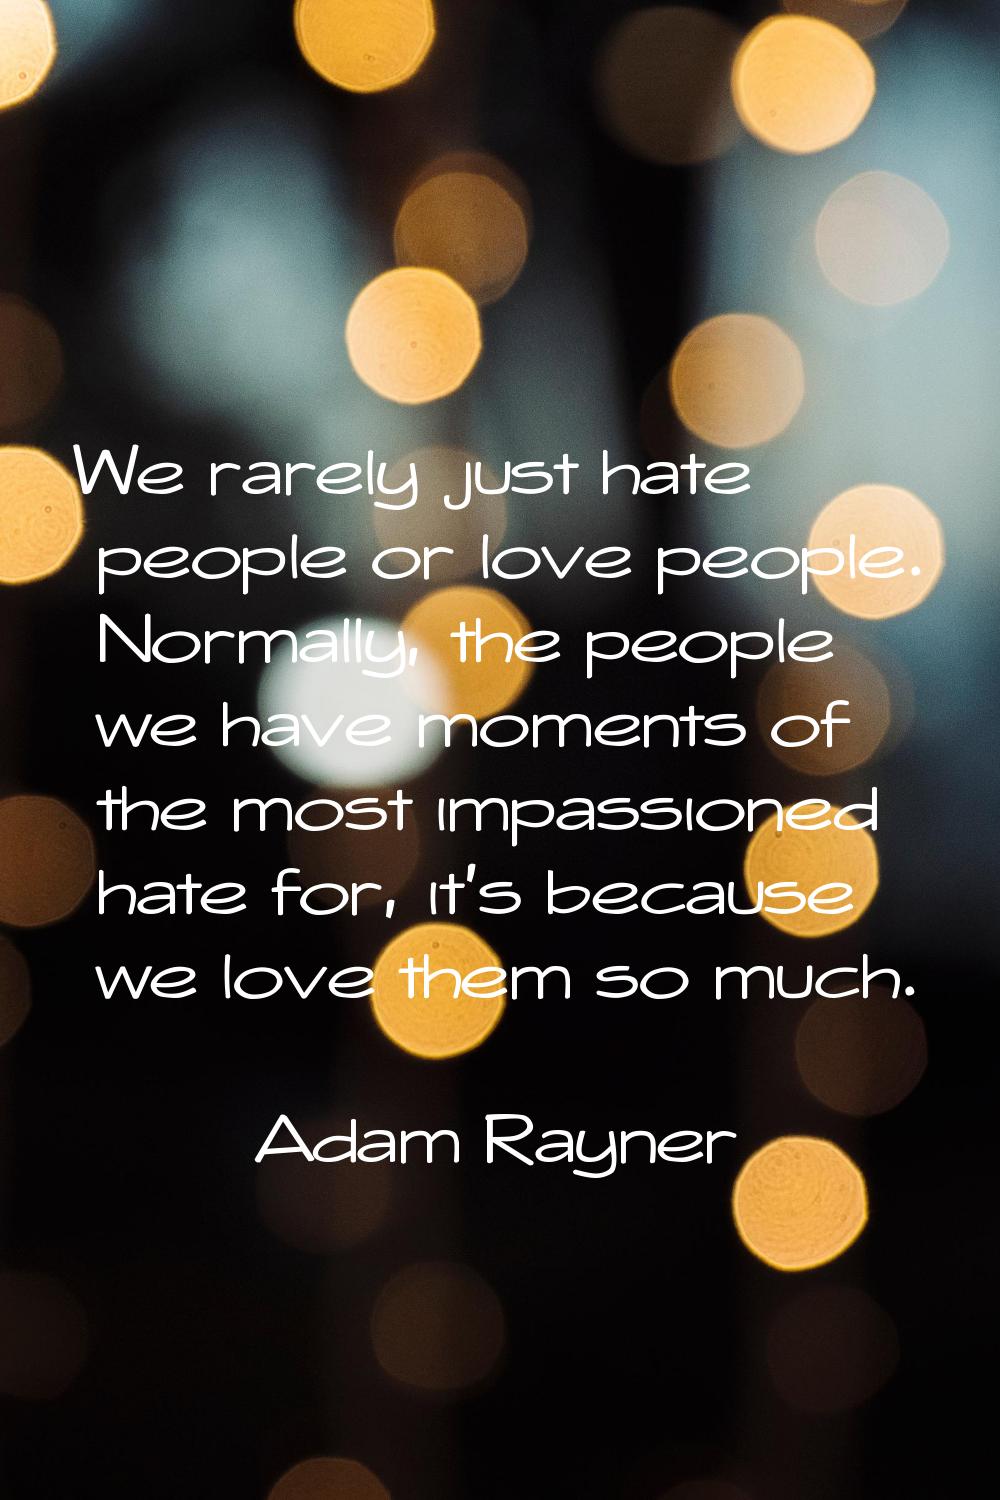 We rarely just hate people or love people. Normally, the people we have moments of the most impassi